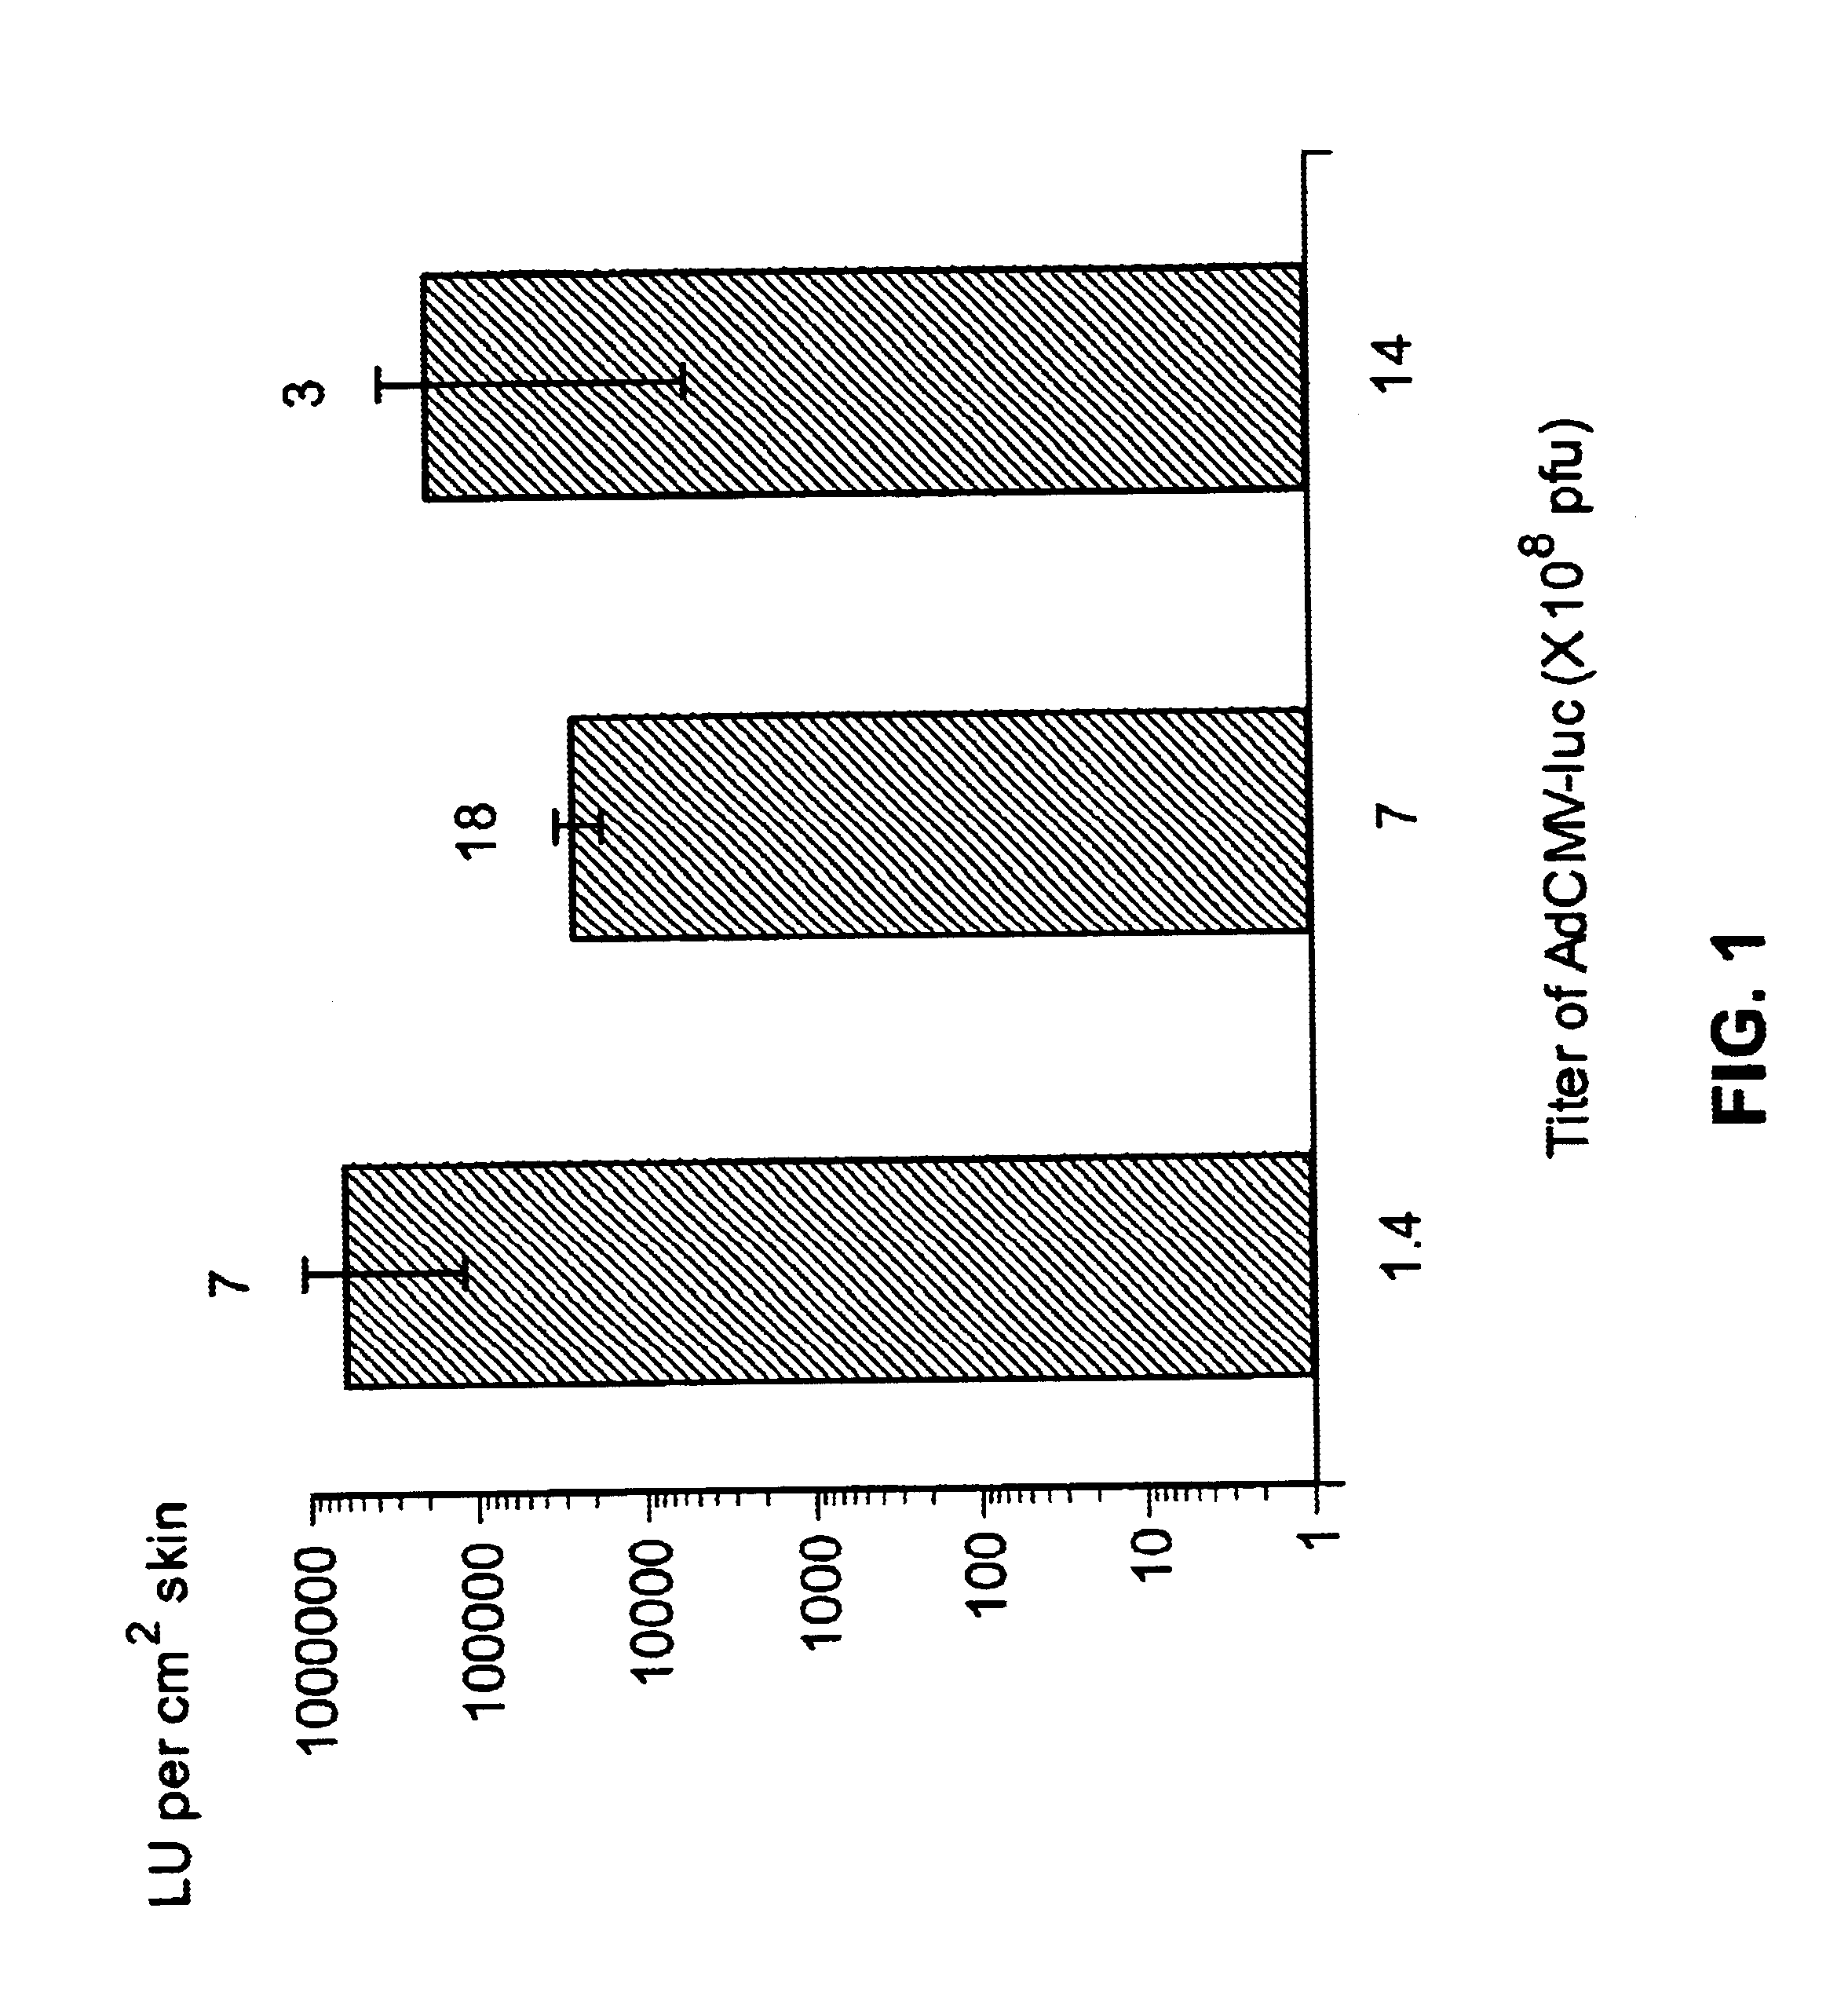 Noninvasive genetic immunization, expression products therefrom, and uses thereof